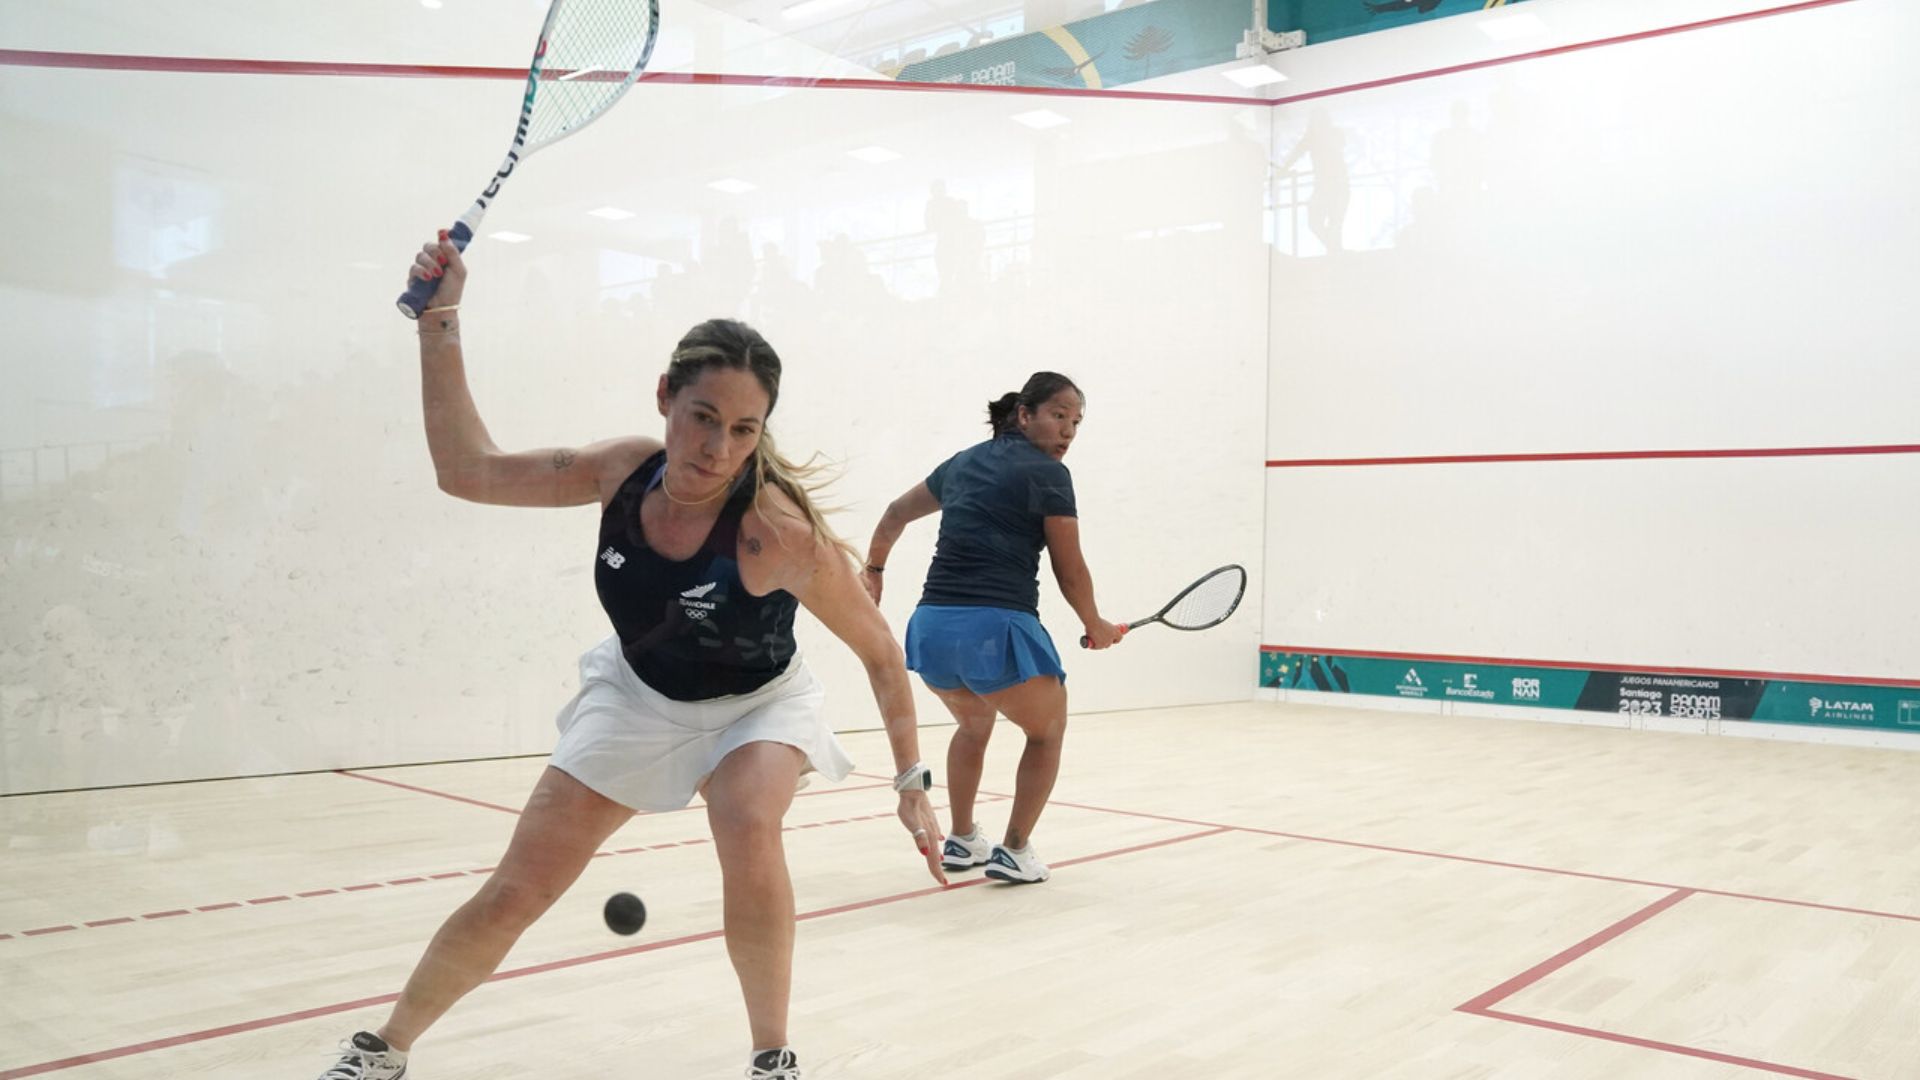 Squash: The United States and Canada to the Female's Team Finals